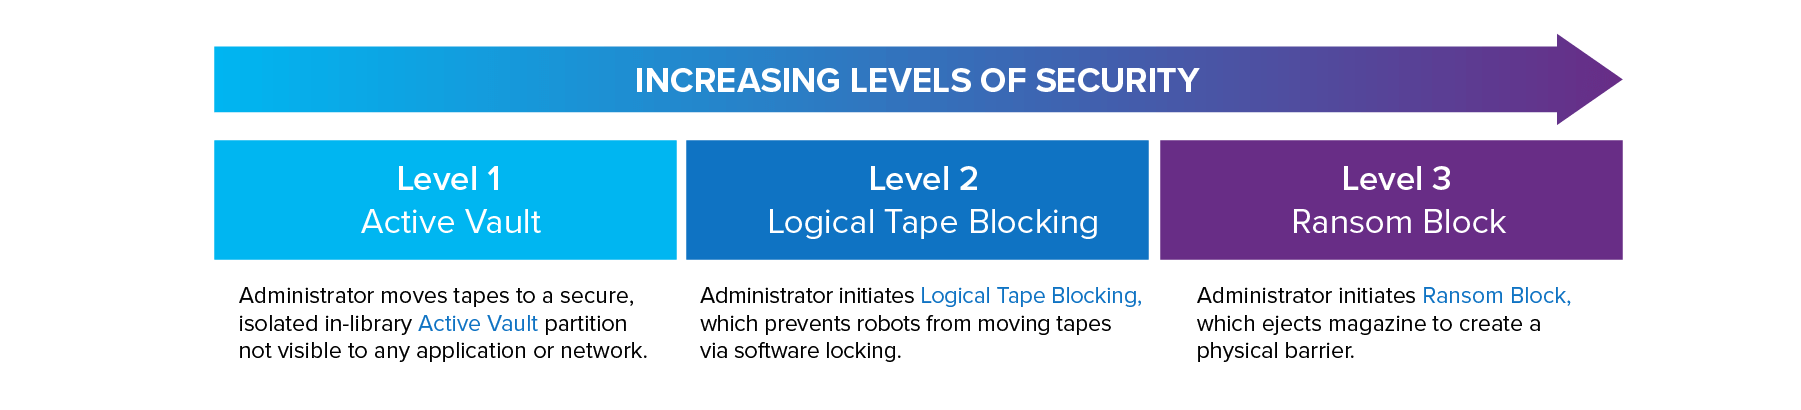 Exclusive Features Provide Multiple Levels of Cyber-Protection and Resiliency